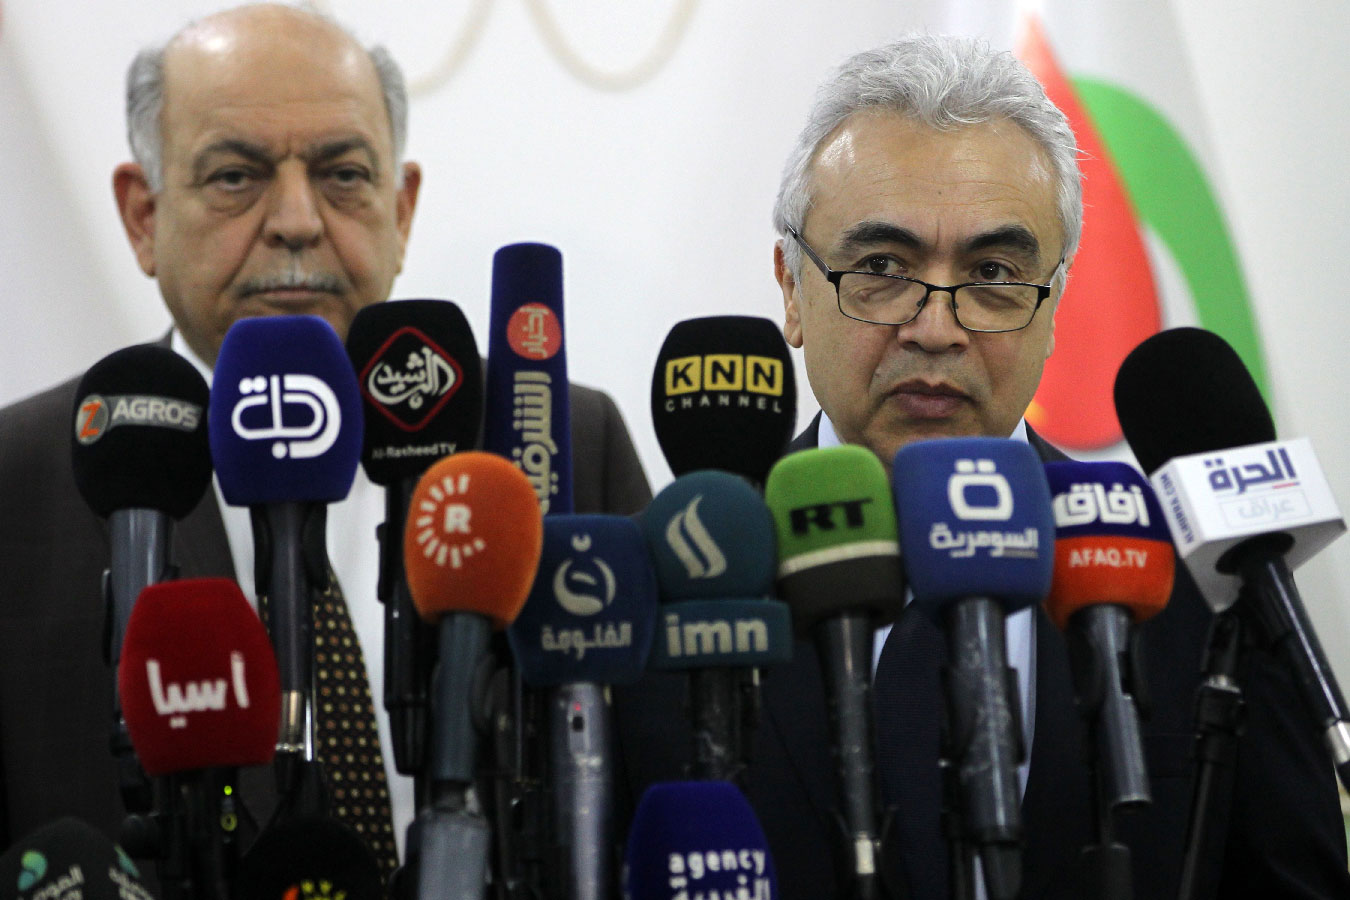 Iraq's Oil Minister Thamer al-Ghadhban (L) and the Executive Director of the International Energy Agency Fatih Birol (R)